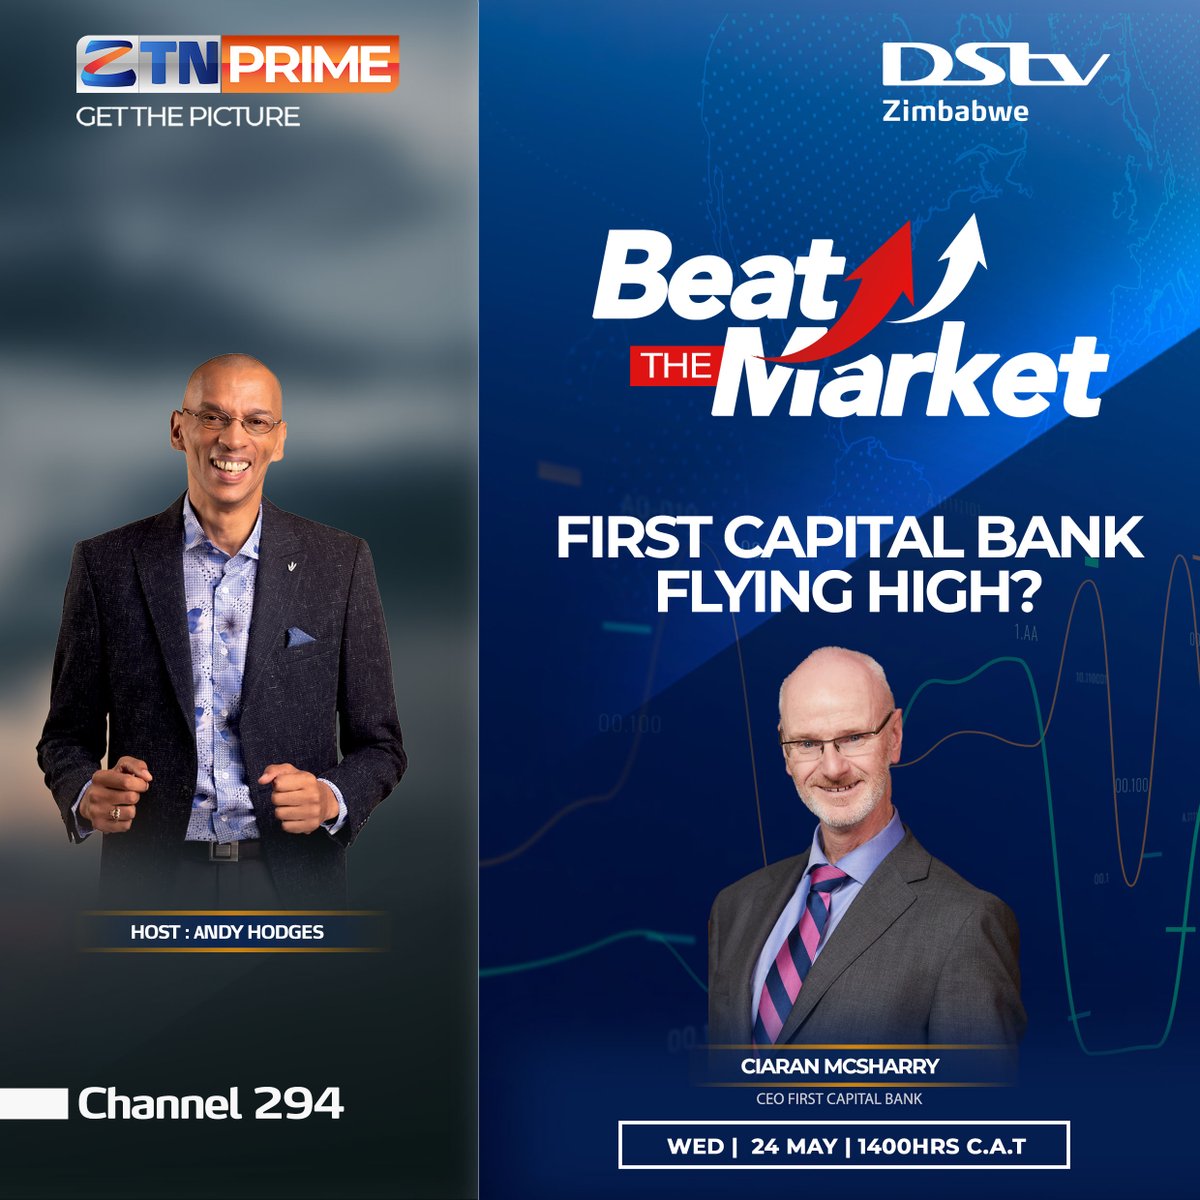 Is First Capital Bank Flying High?

Find out more on today's (Wednesday) episode of #BeatTheMarket LIVE on #ZTNPrime, #DStv294 at 14:00 HRS CAT.

#GetThePicture #Zimbabwe #ZTNPrimeTurns1